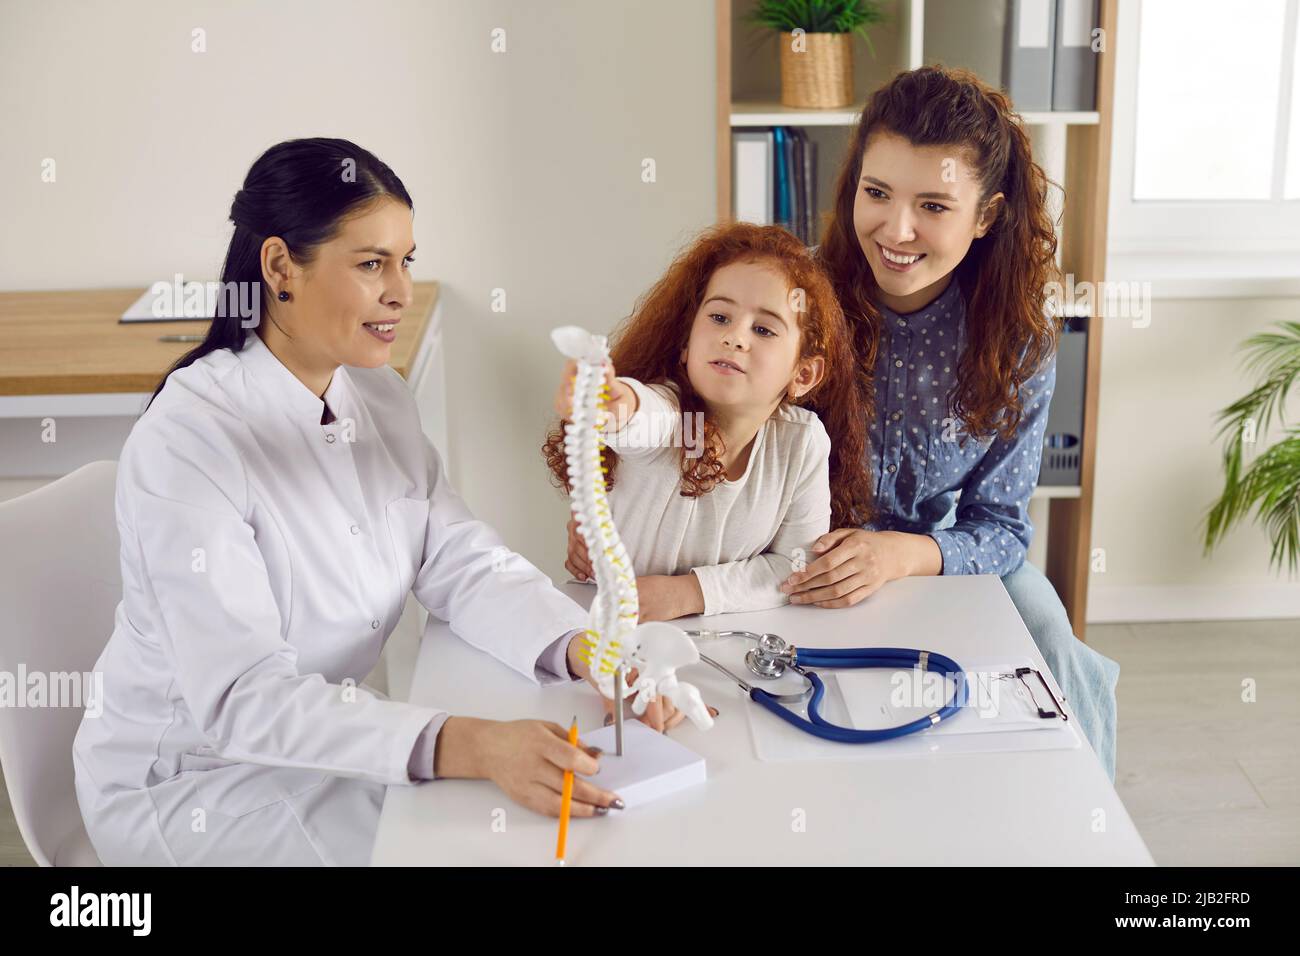 Little cute girl examines anatomical model of spine who is standing on table in doctor's office. Stock Photo